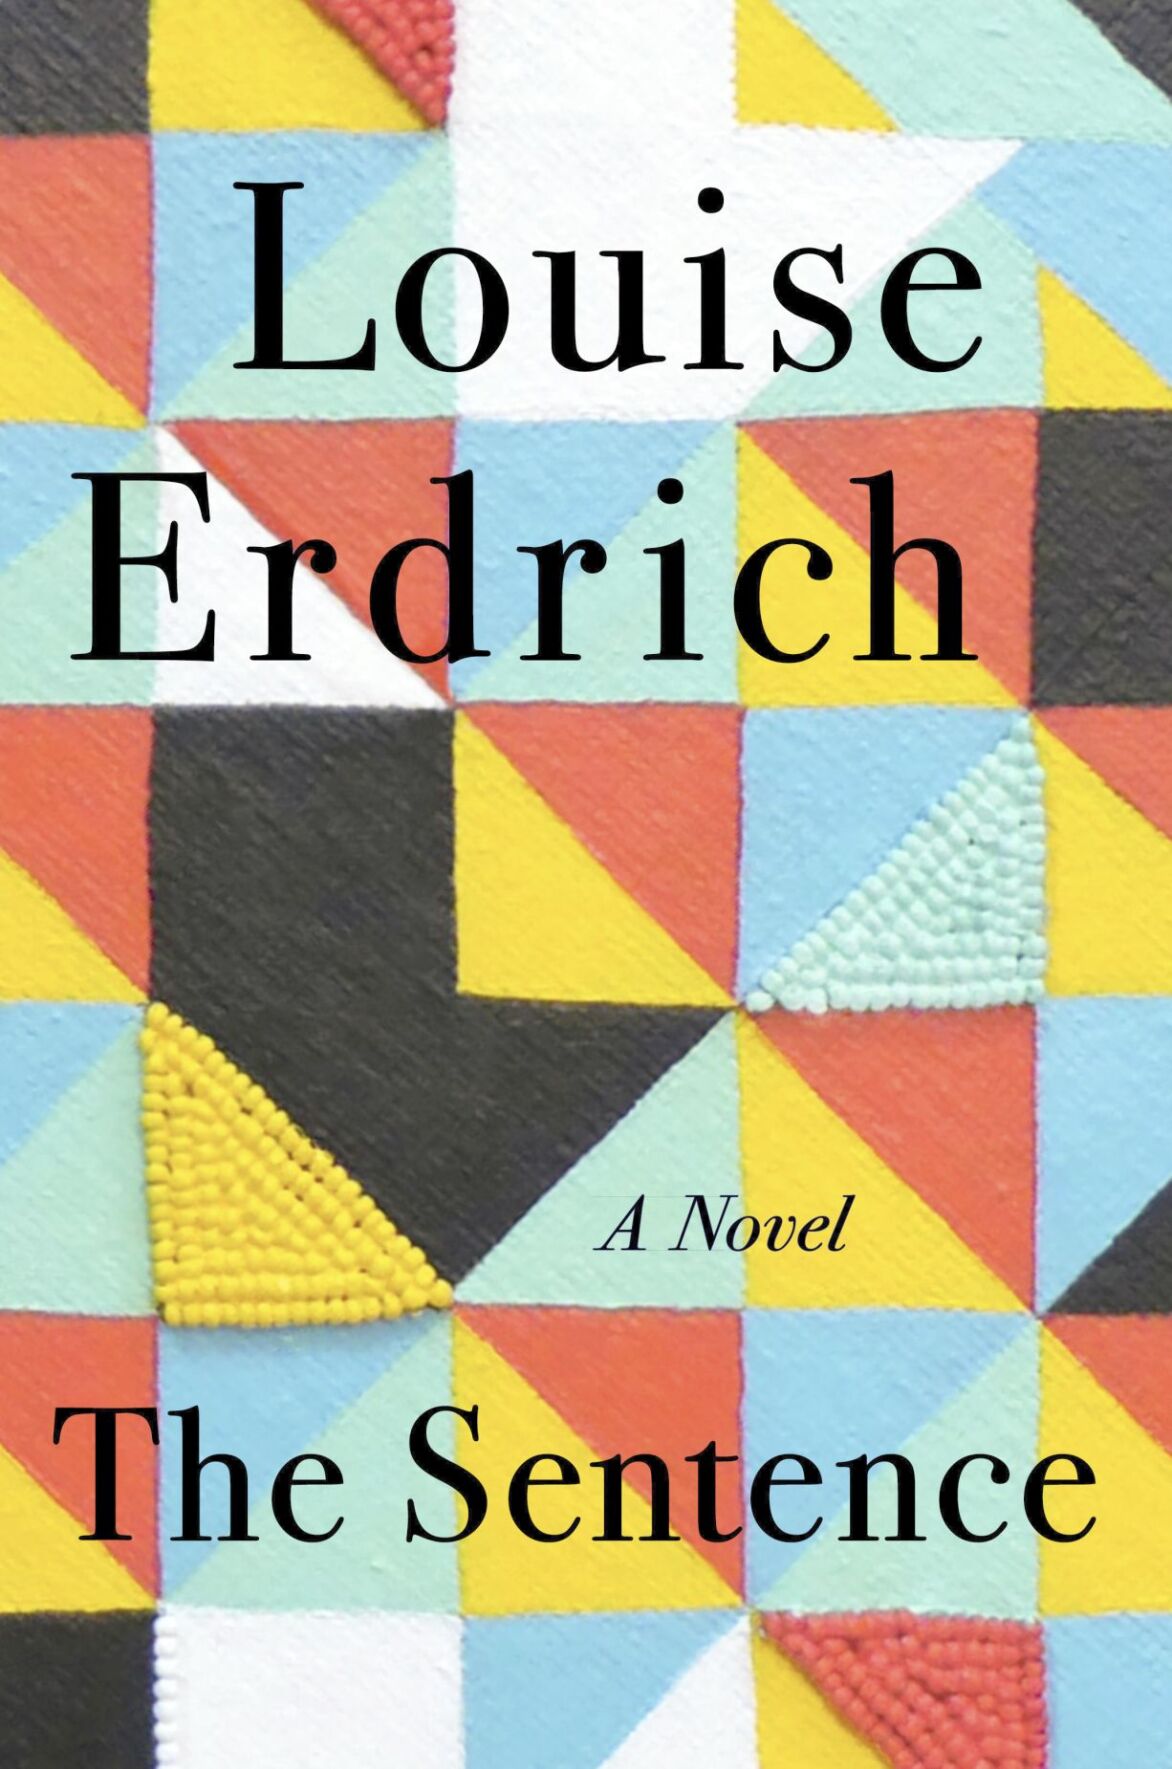 Book Review - The Sentence